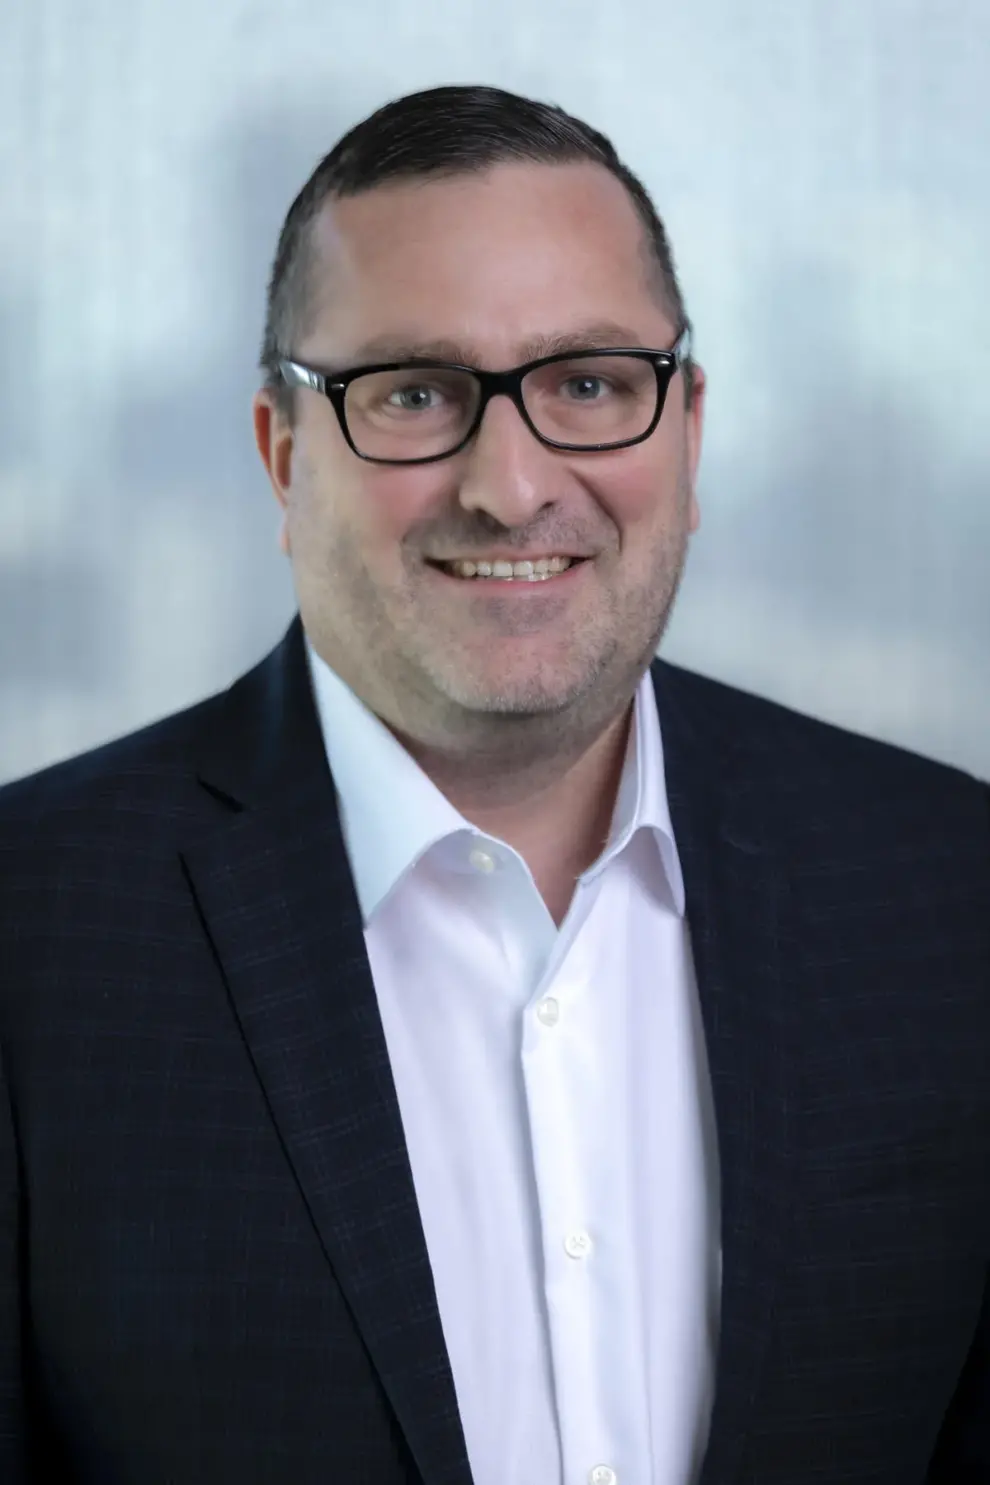 <strong>Vortex Companies Appoints Matt Timberlake to New Role as SVP Shared Services</strong>